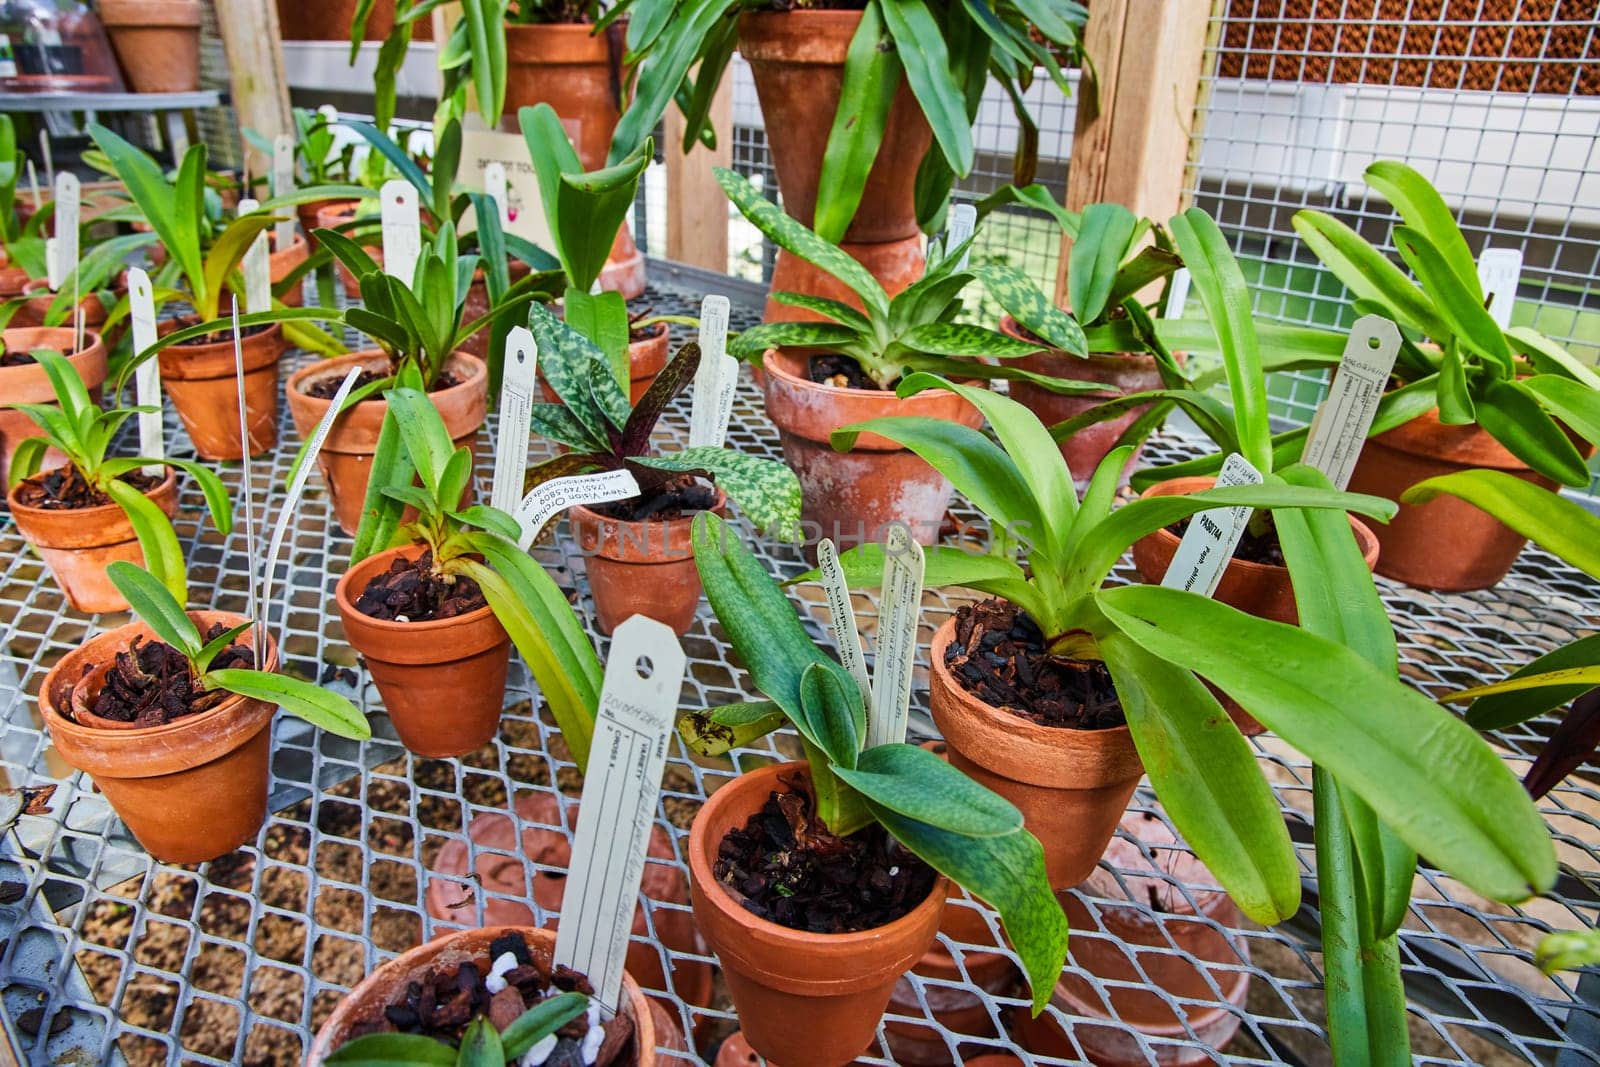 Variety of Orchids in Terracotta Pots on Greenhouse Shelf by njproductions